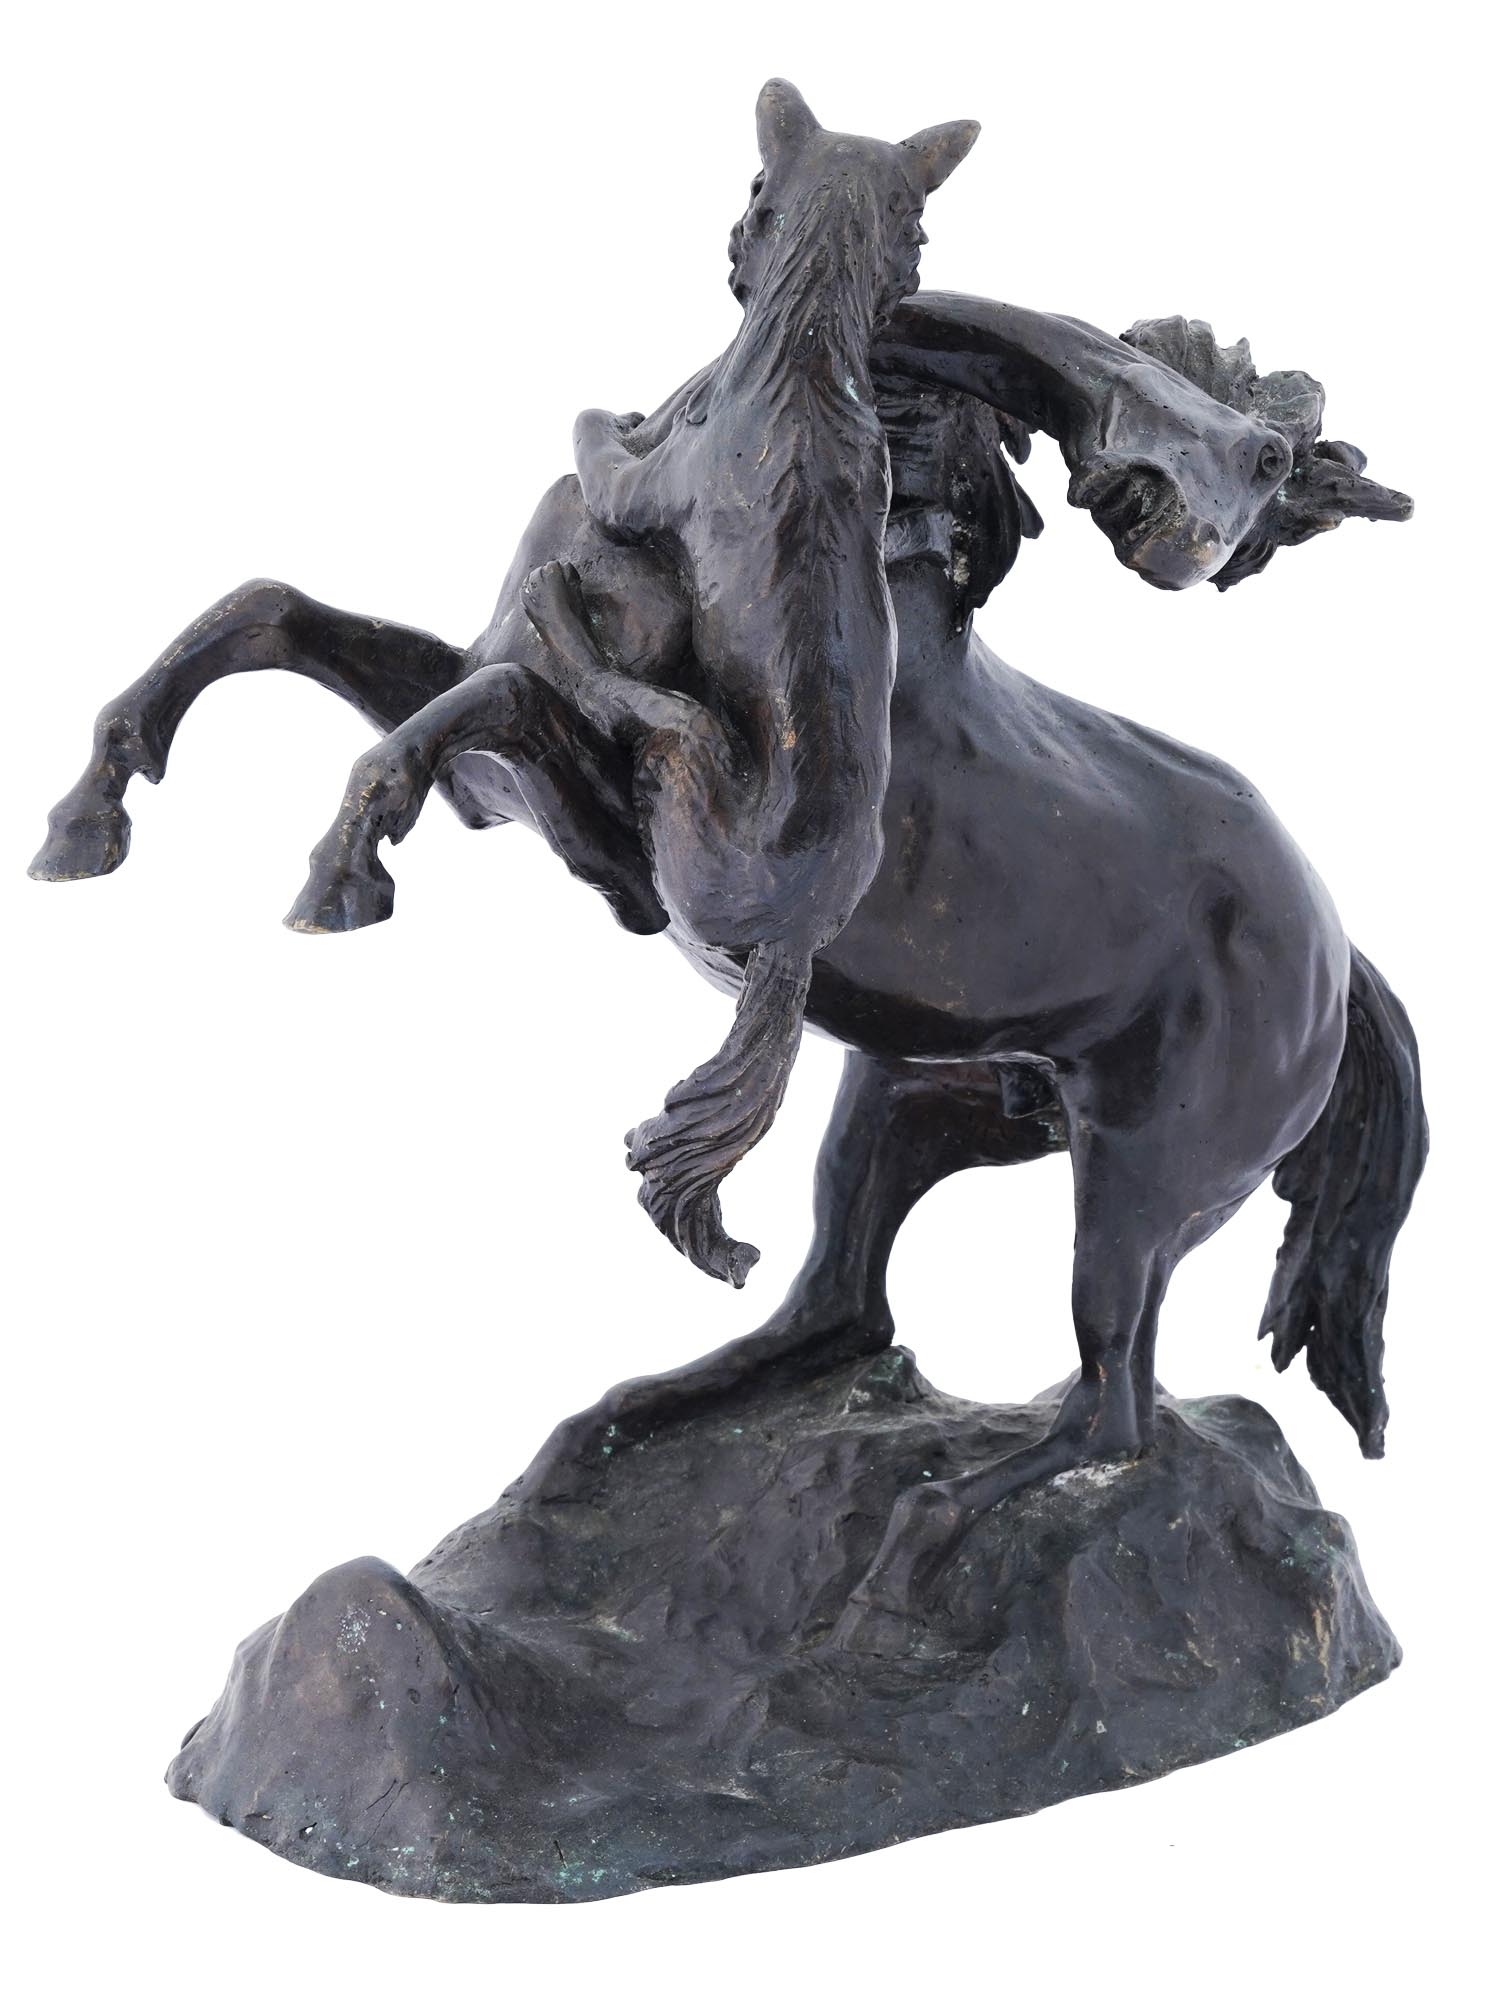 ATTACK SCENE WITH WOLF AND HORSE BRONZE SCULPTURE PIC-0